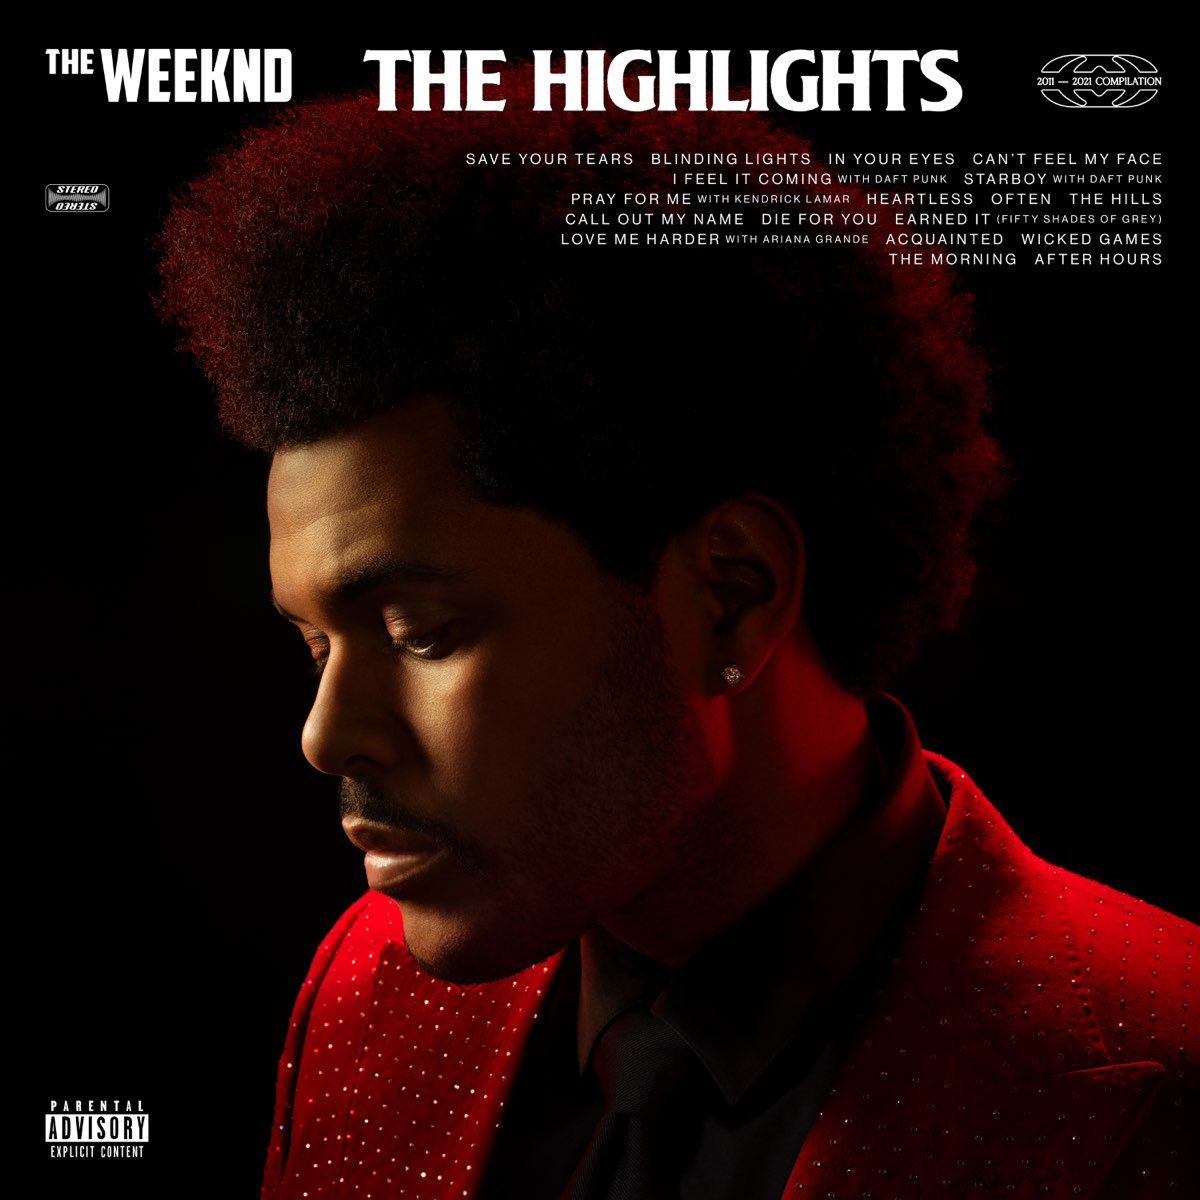 The Weeknd The Highlights cover artwork